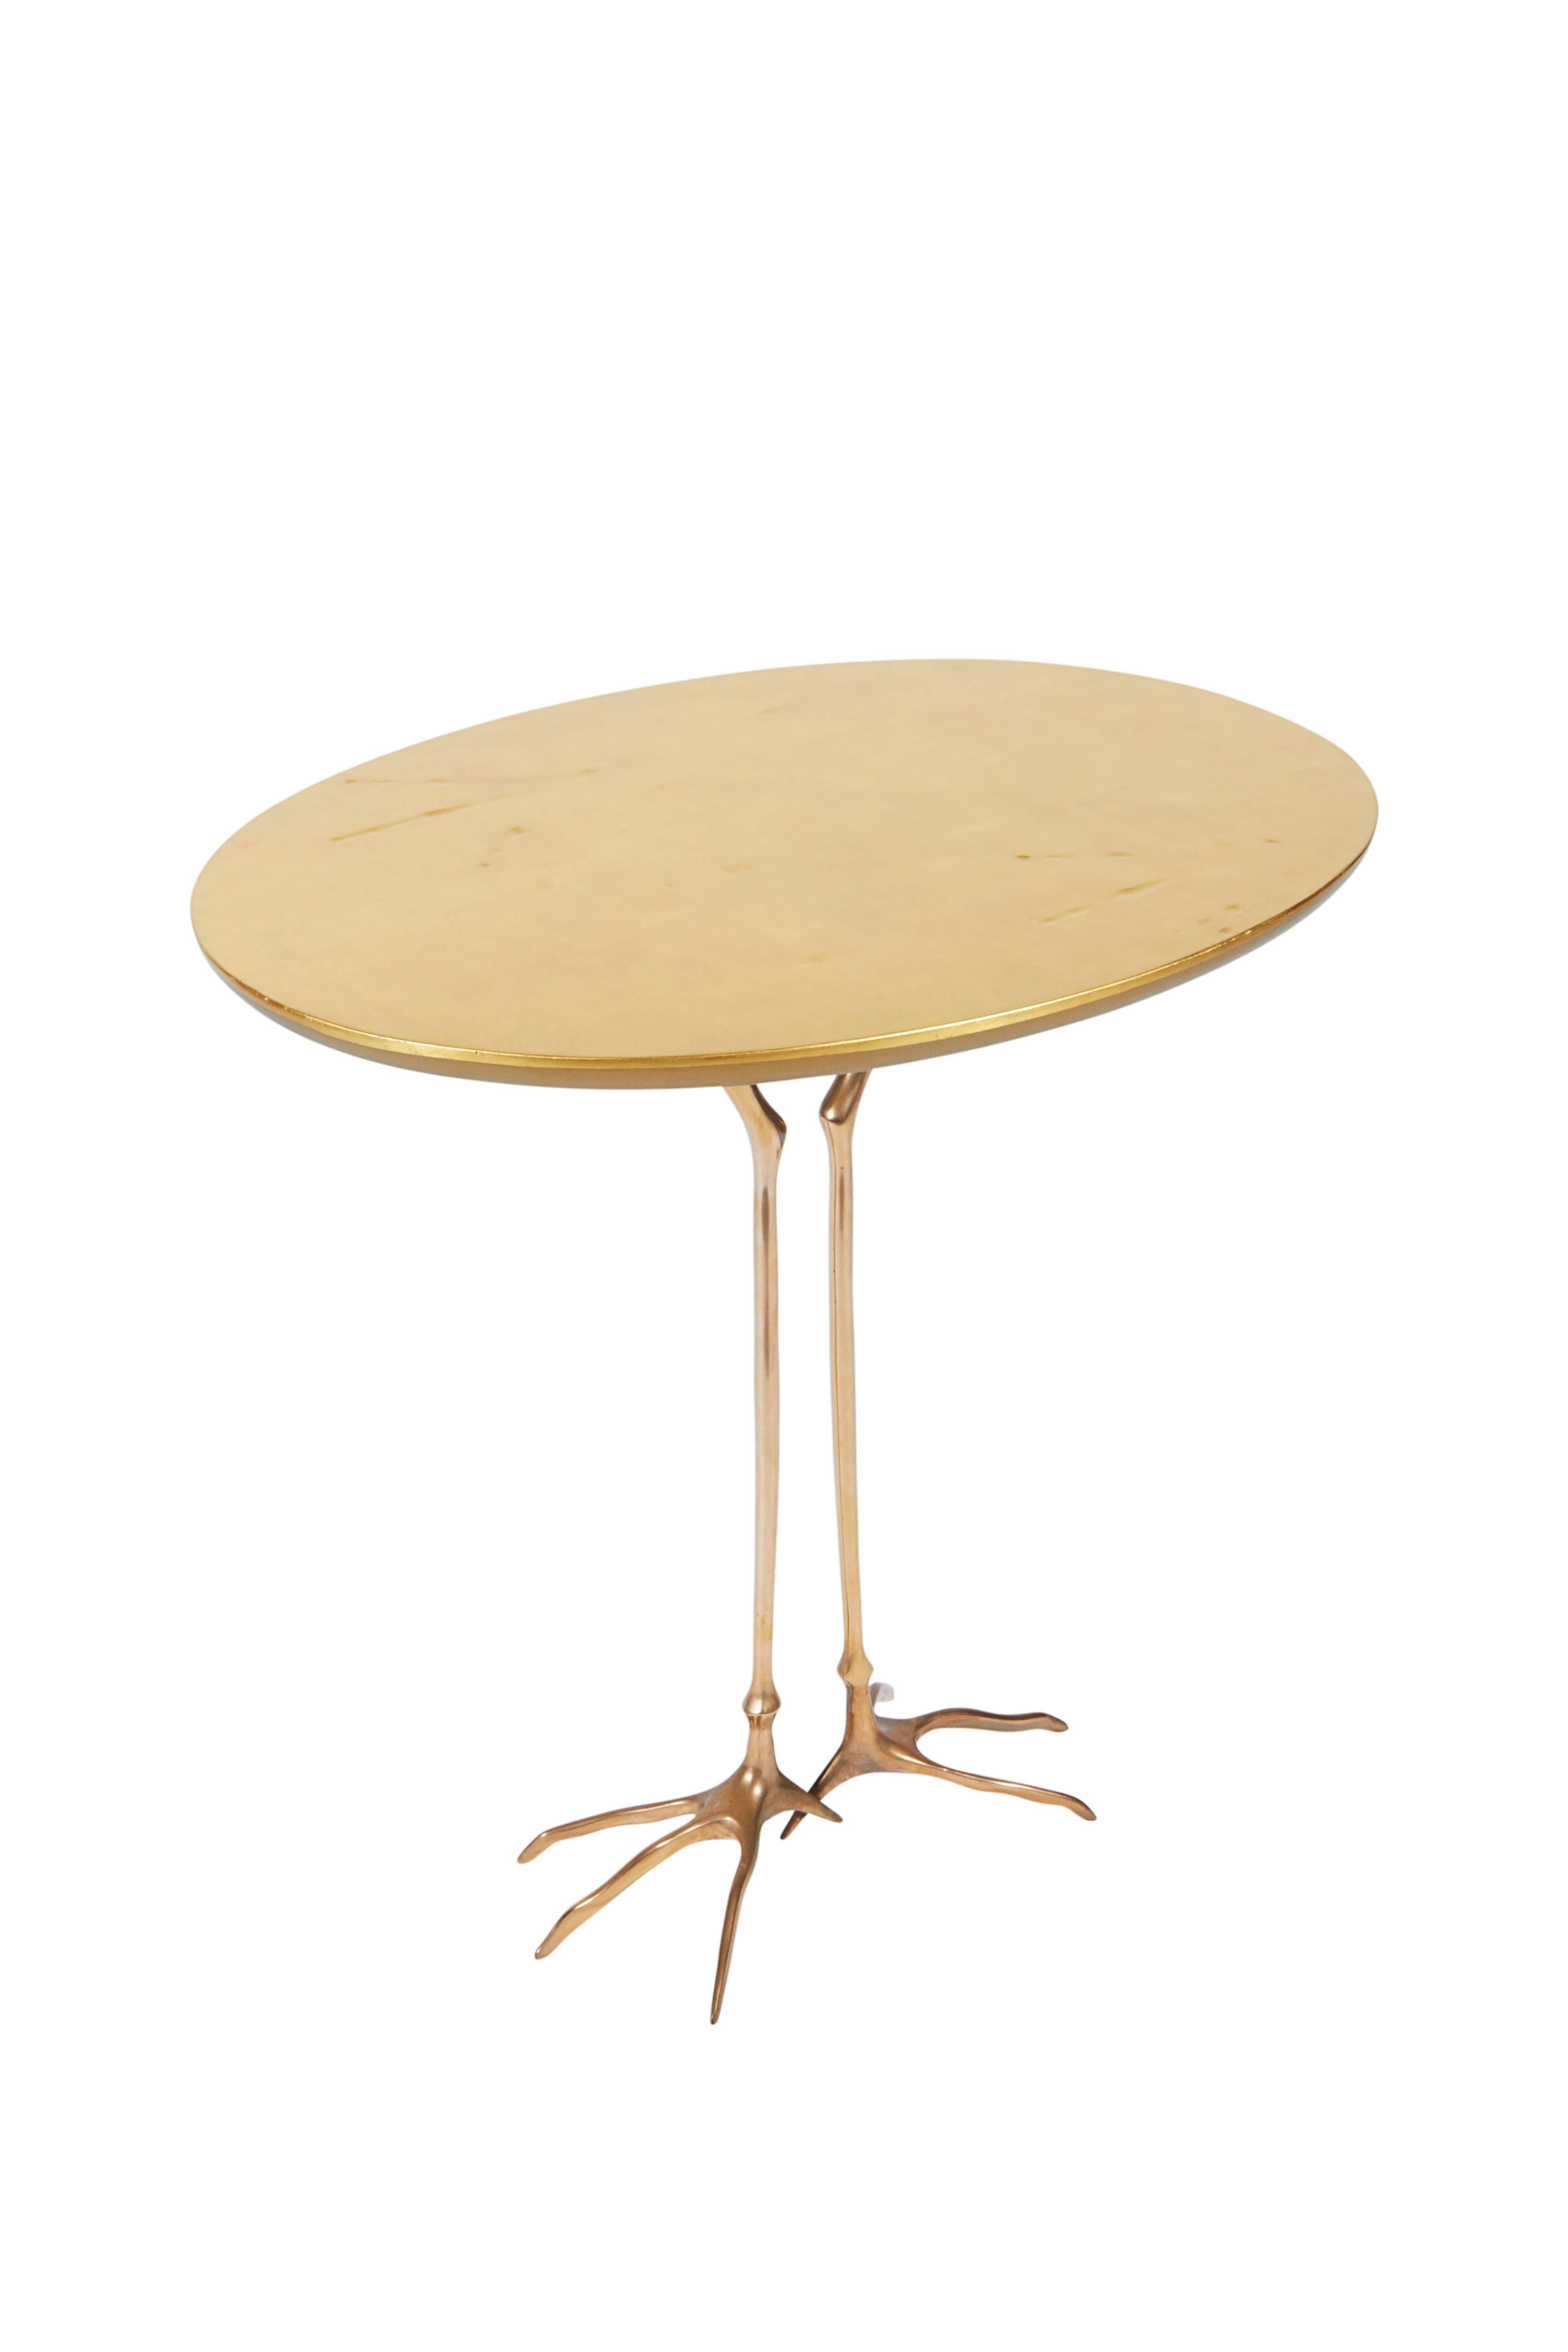 An outstanding and well documented reproduction of the Classic Meret Oppenheim Traccia table. This latter model has the addition of the subtle tracks embossed into the gold leaf top.